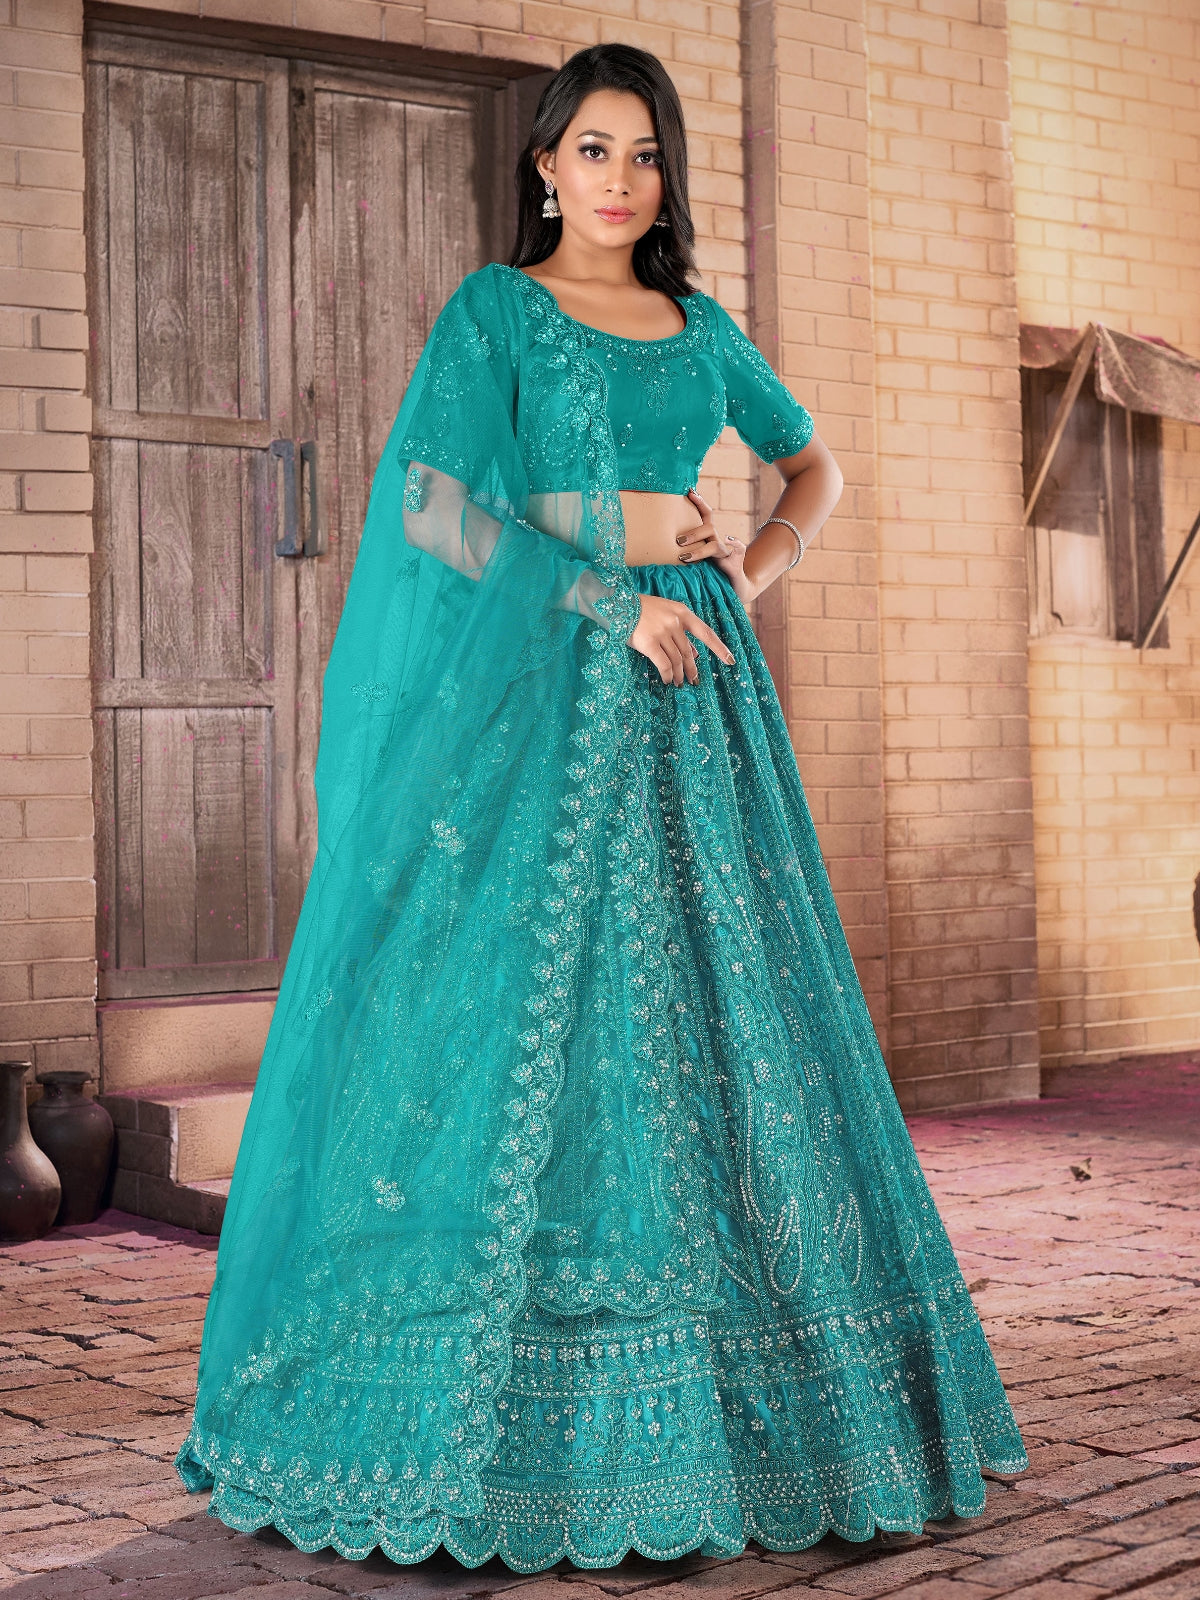 Odette Blue Soft Net Bridal Semi Stitched  Lehenga With Unstitched Blouse For Women